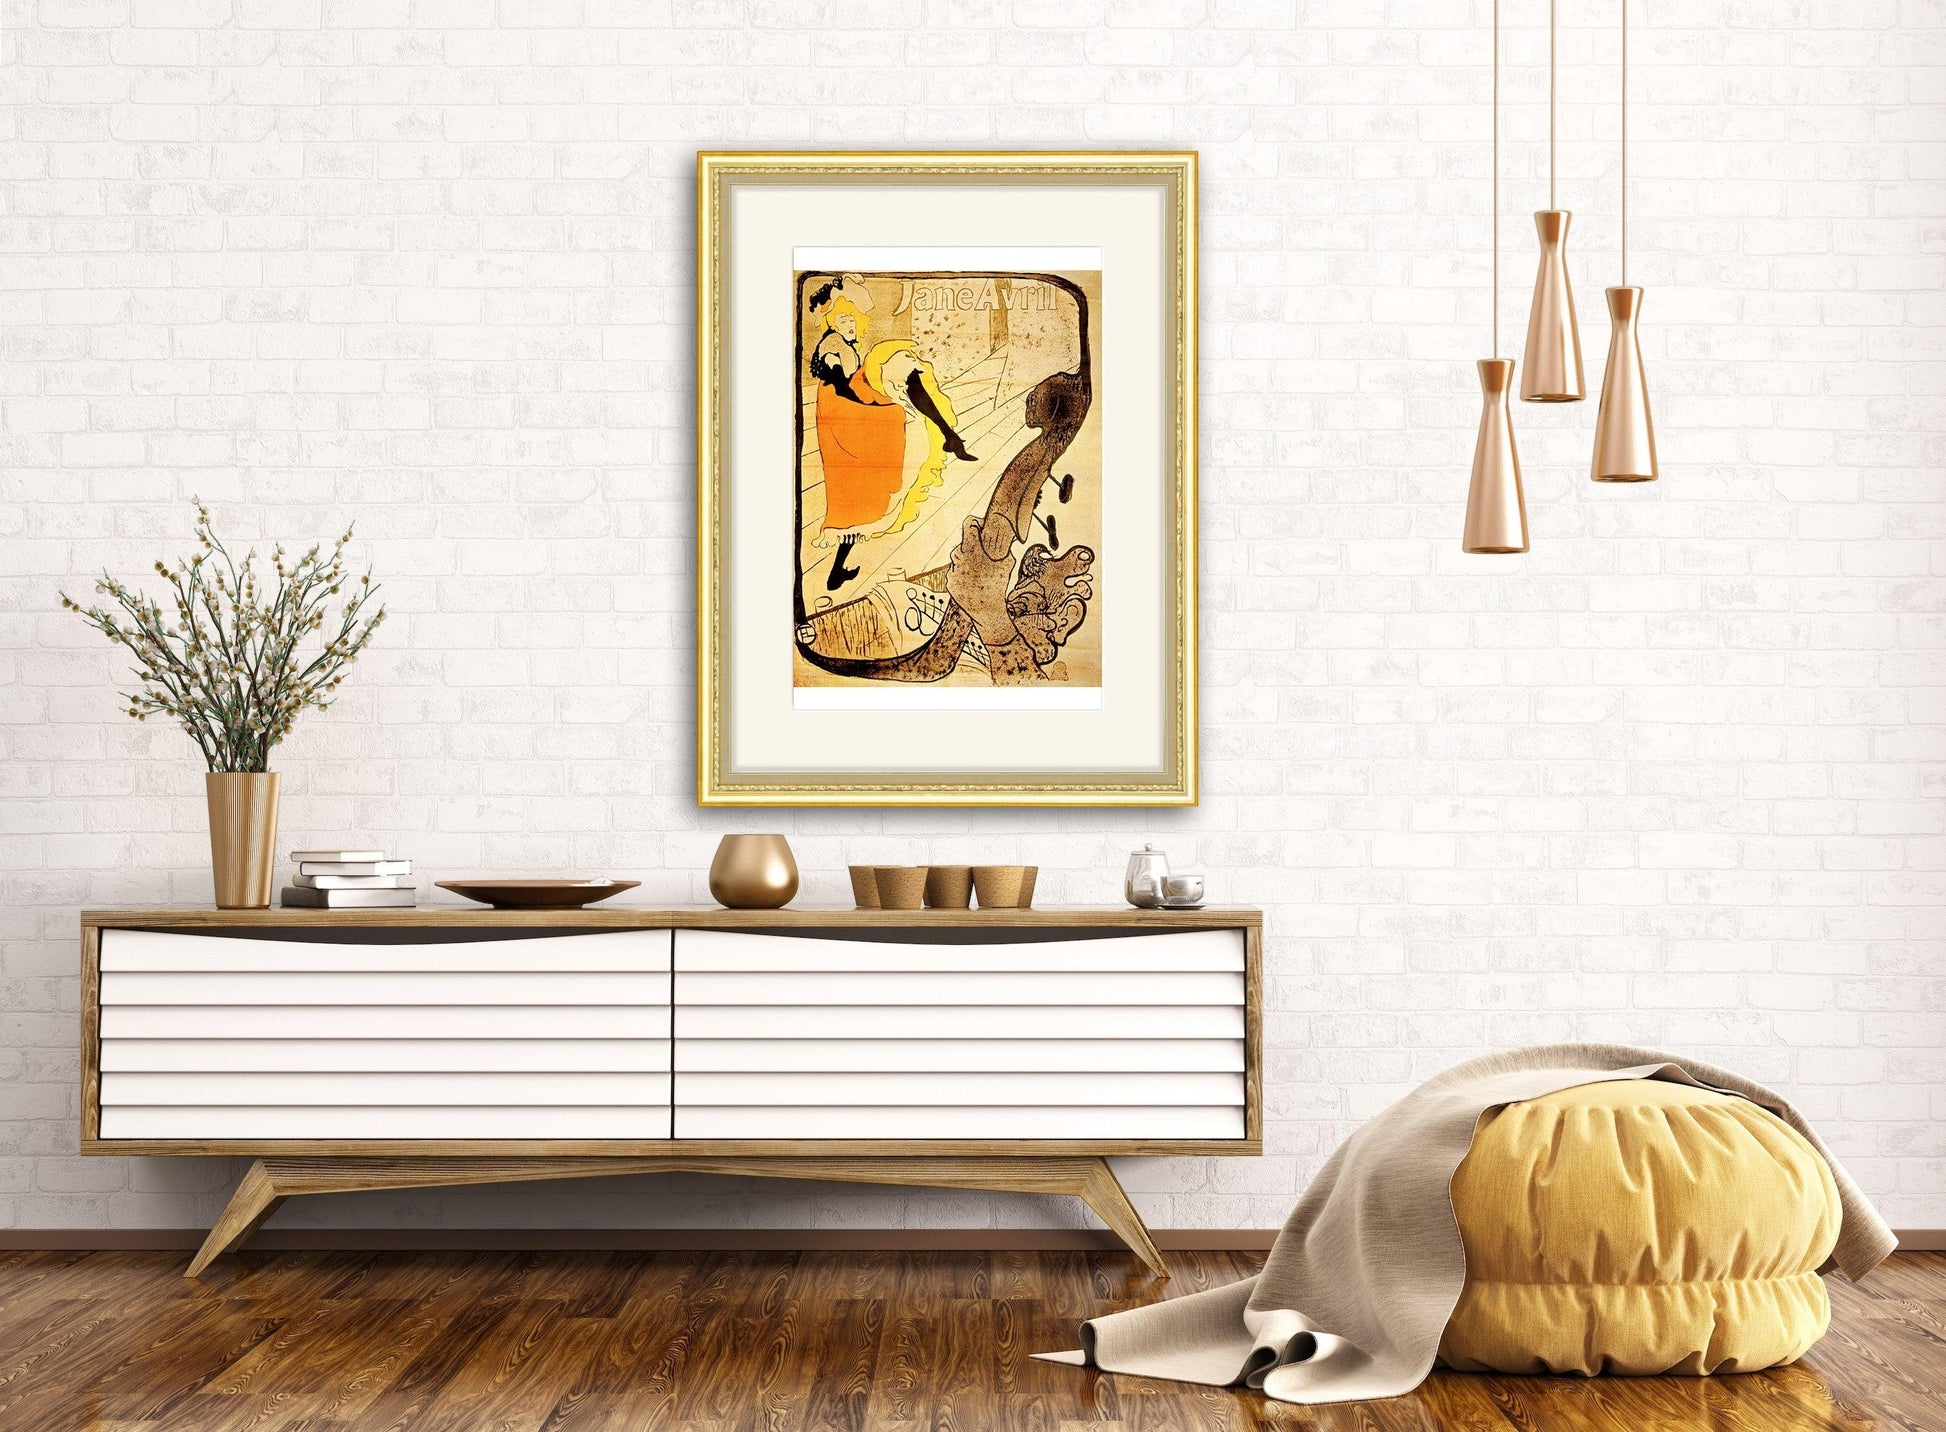 Give your home decor a touch of elegance through our exquisite Jane Avril reproduction poster. The artwork is a collage with the dancers in art design by Henri de Toulouse-Lautrec (French printmaker, 1864-1901). Year of created 1893.